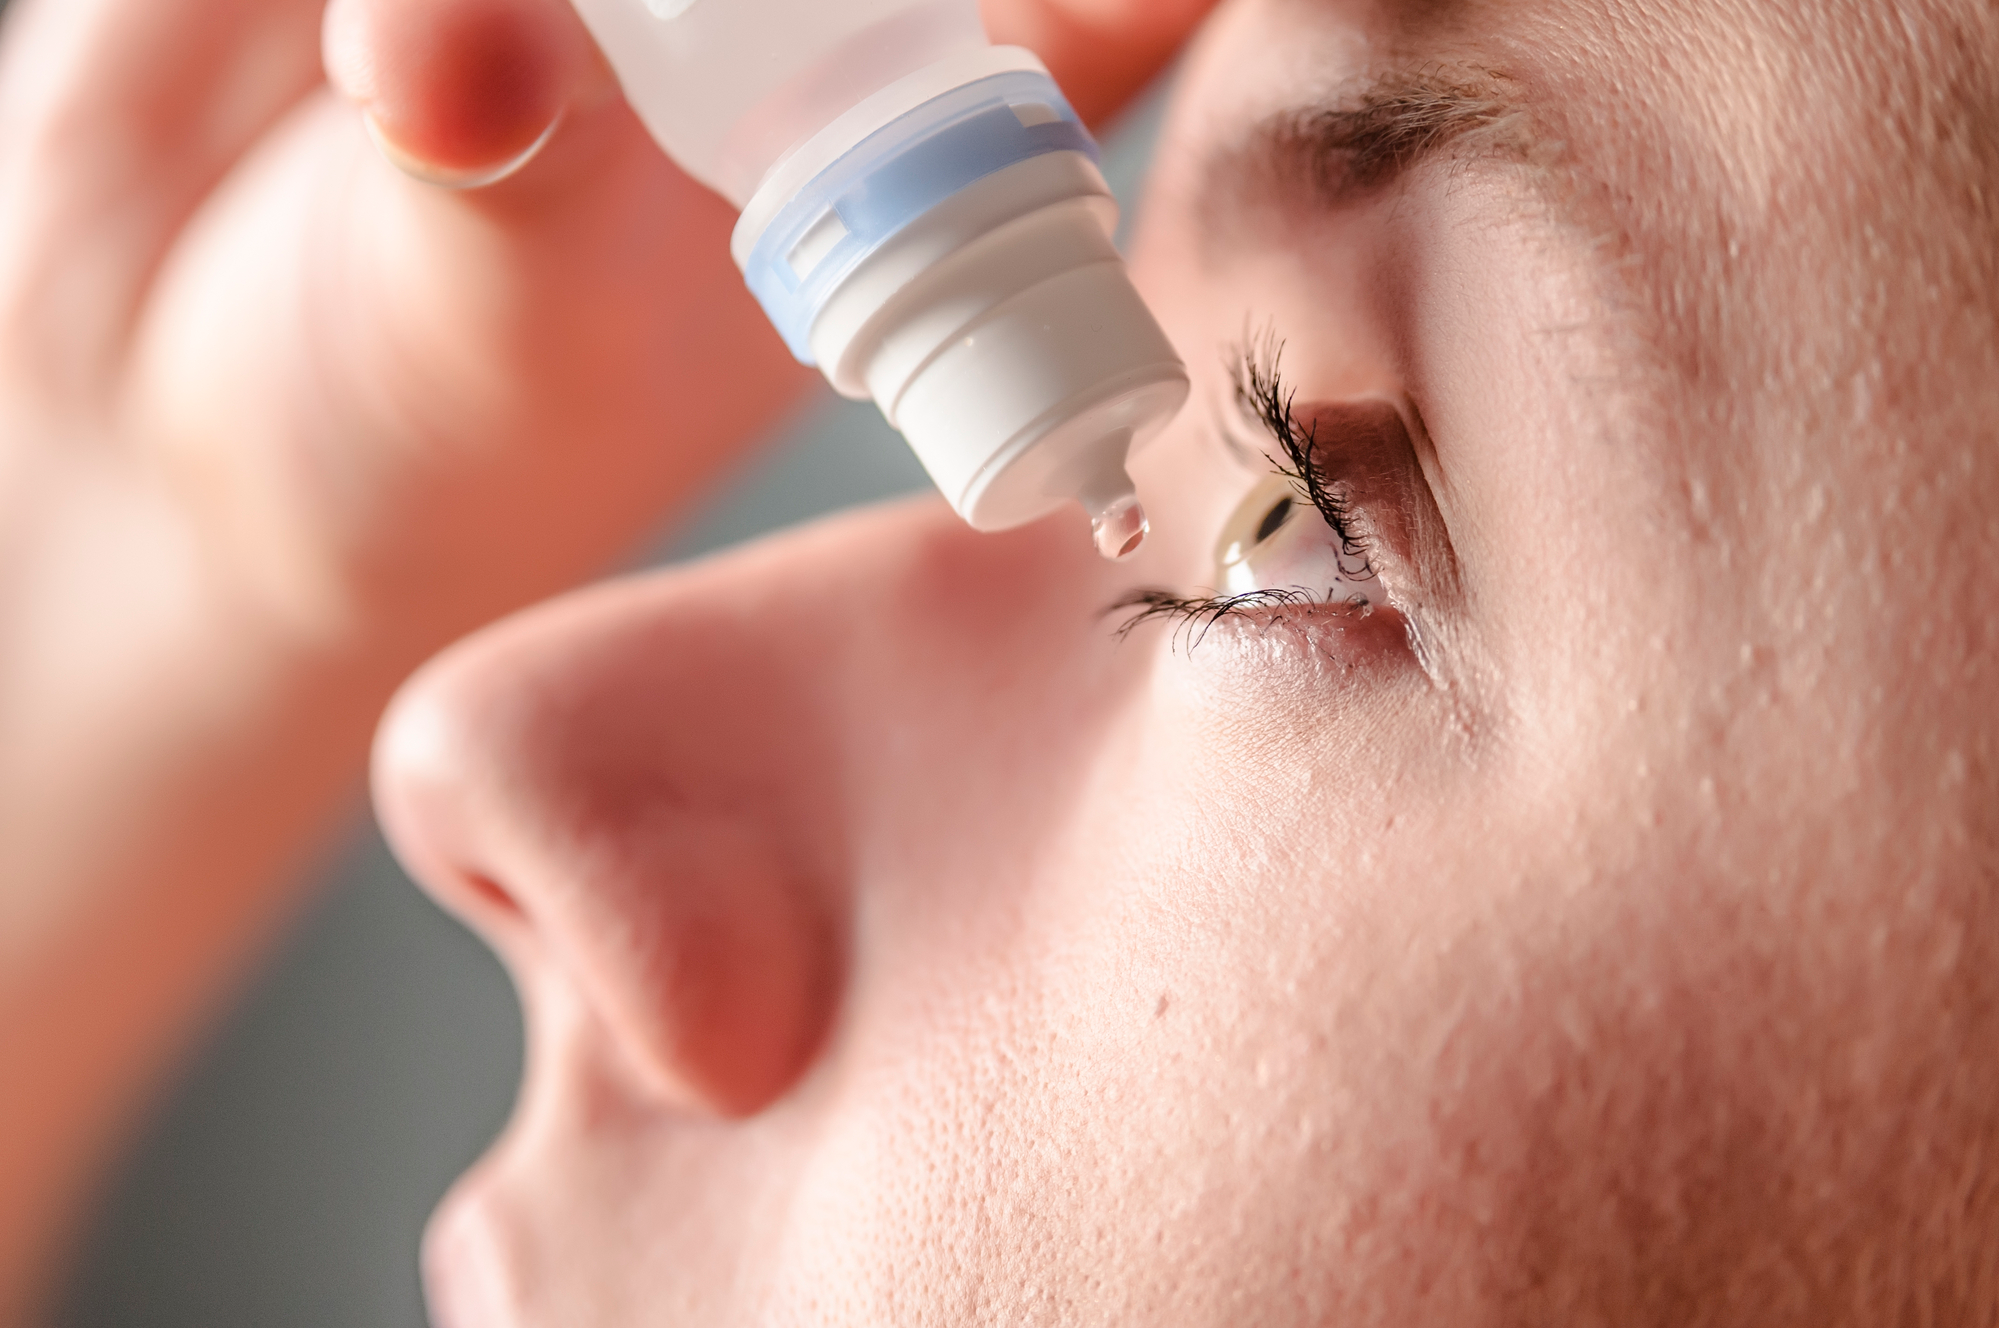 how to not look high without eye drops, how to get rid of stoned eyes fast,